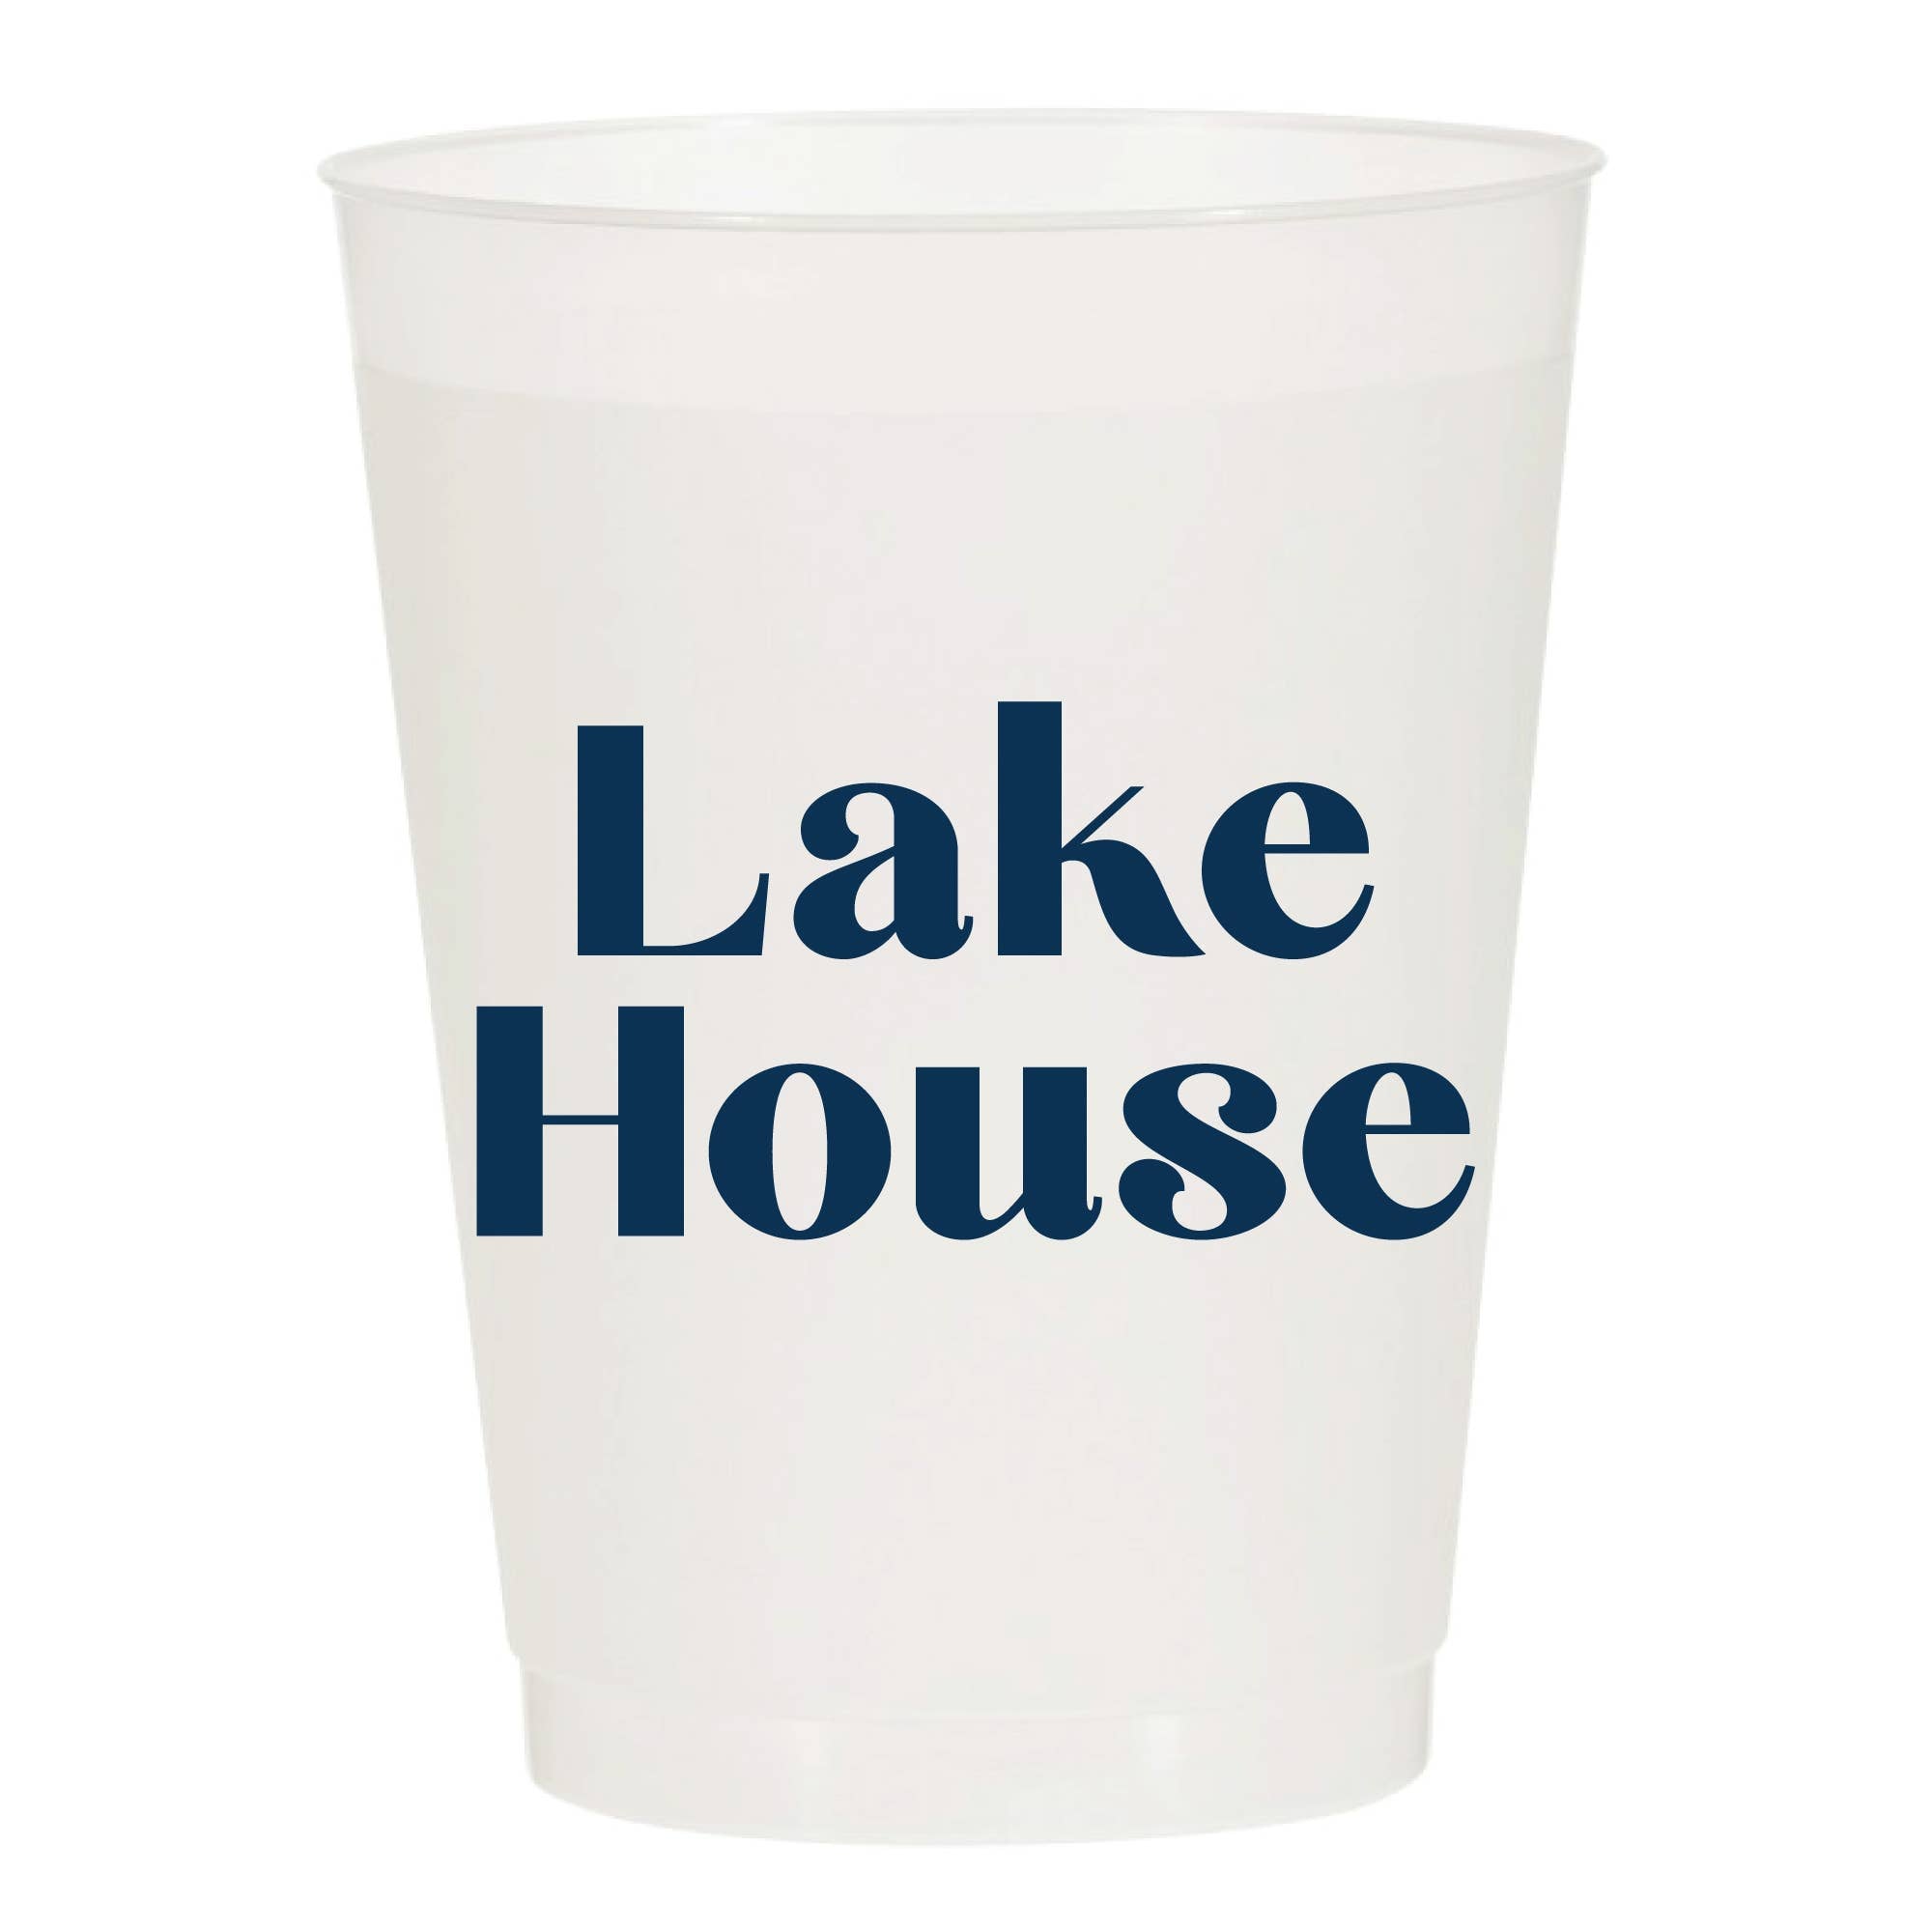 Lake House Reusable Cups - Set of 10 Cups - The Preppy Bunny